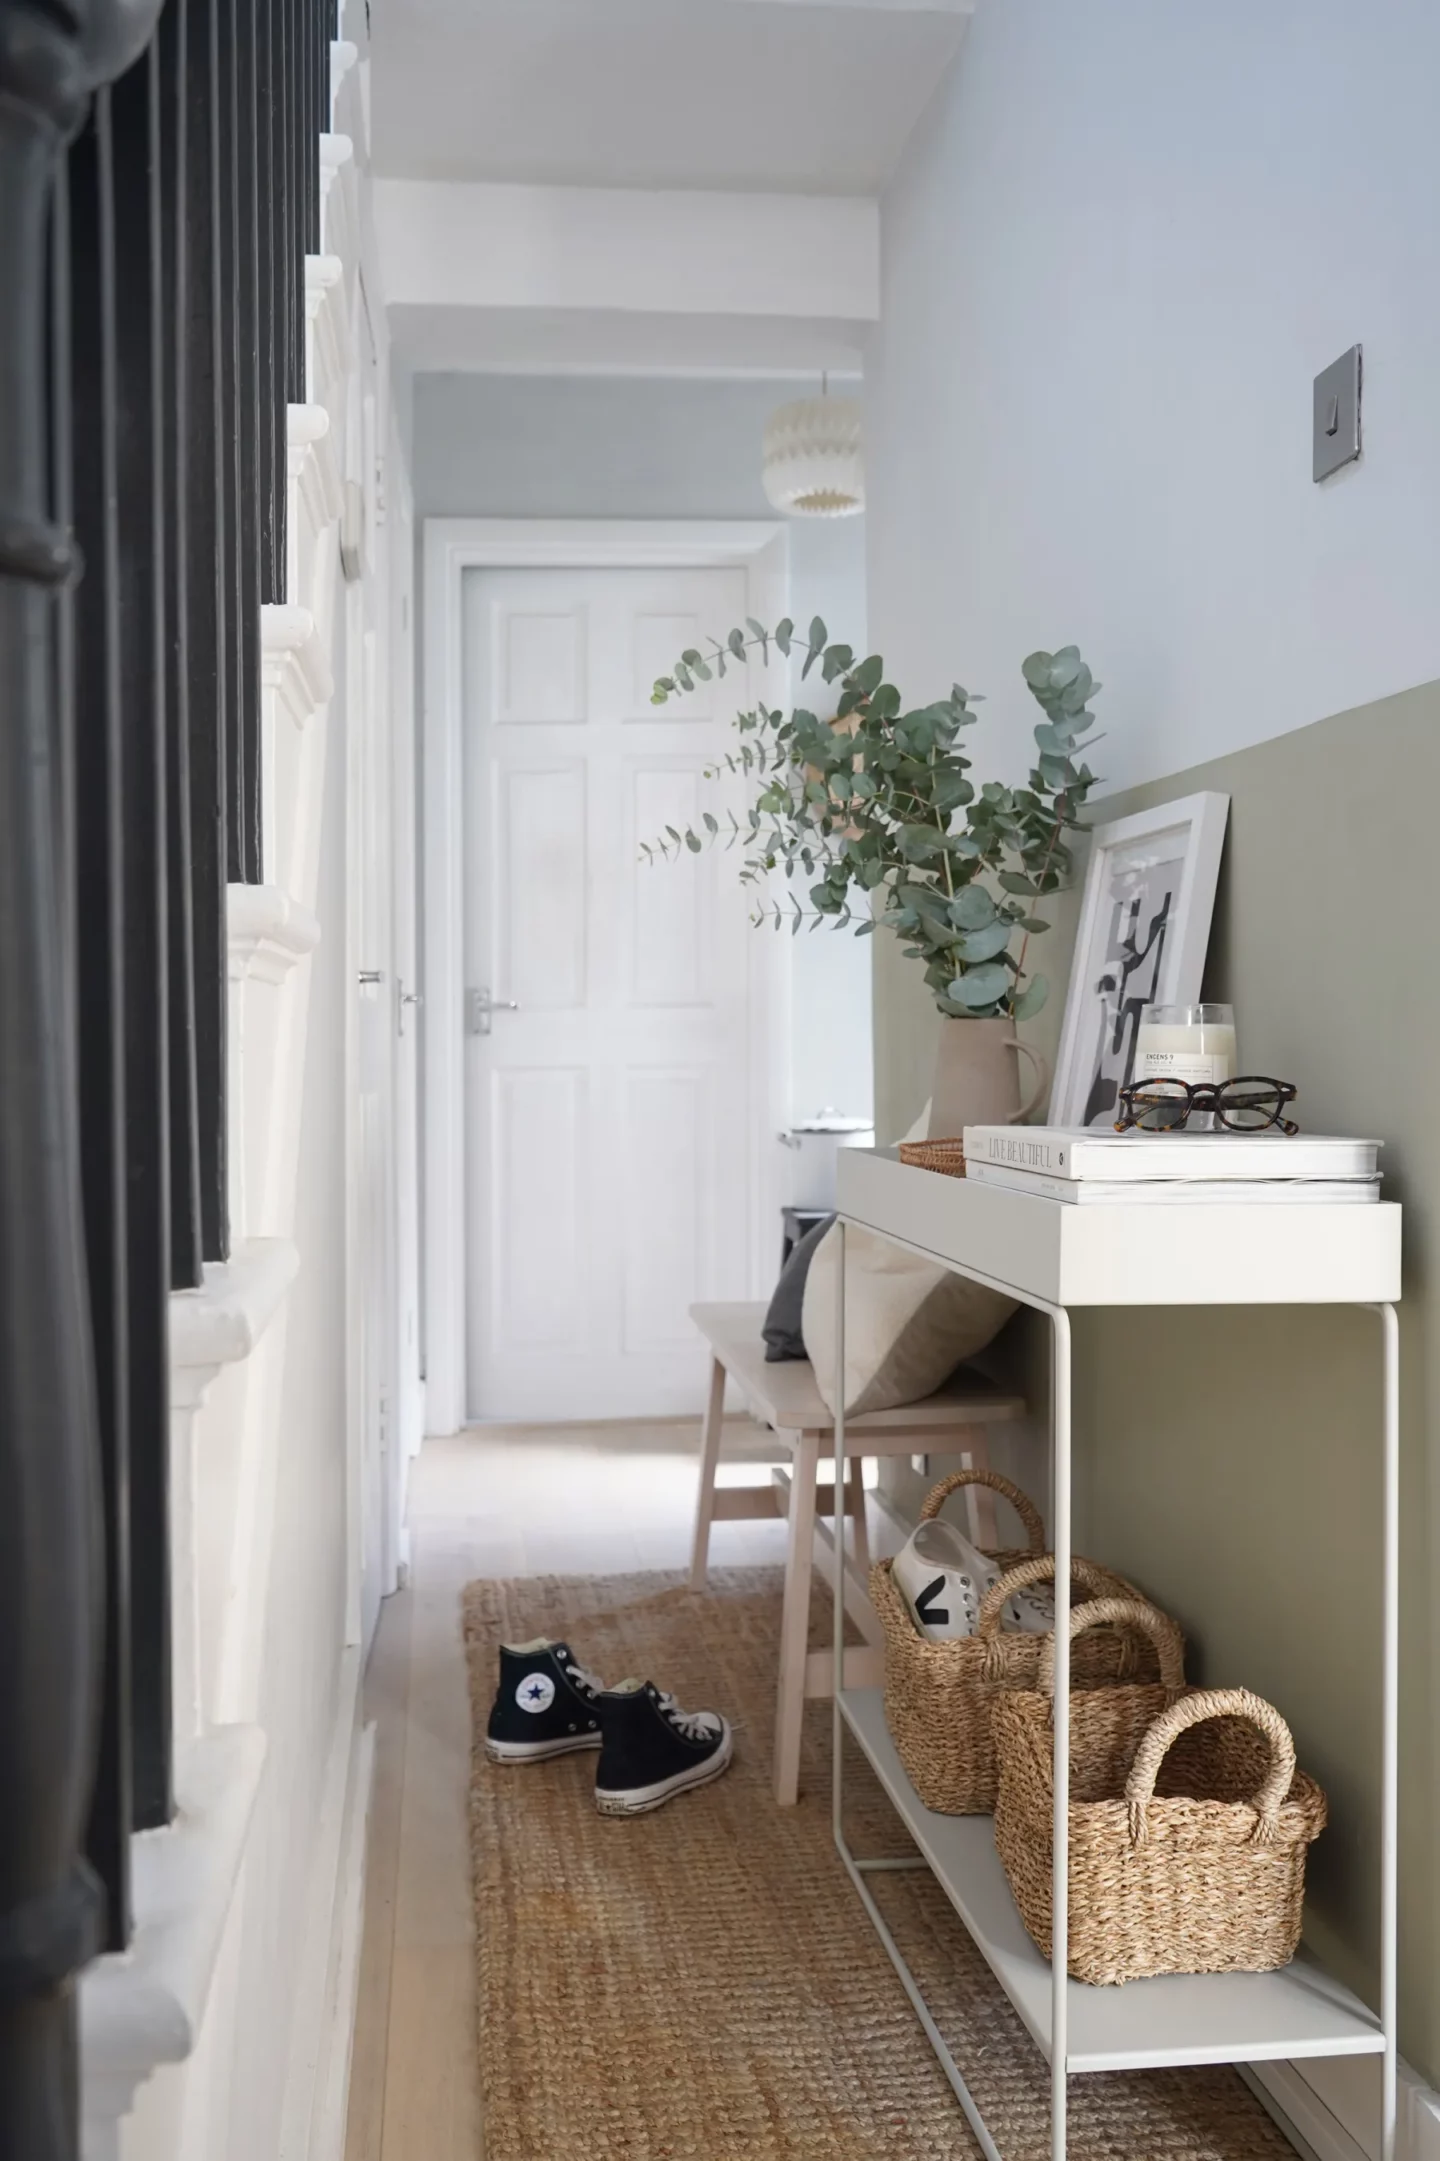 Five Storage Solutions For a Small Entryway